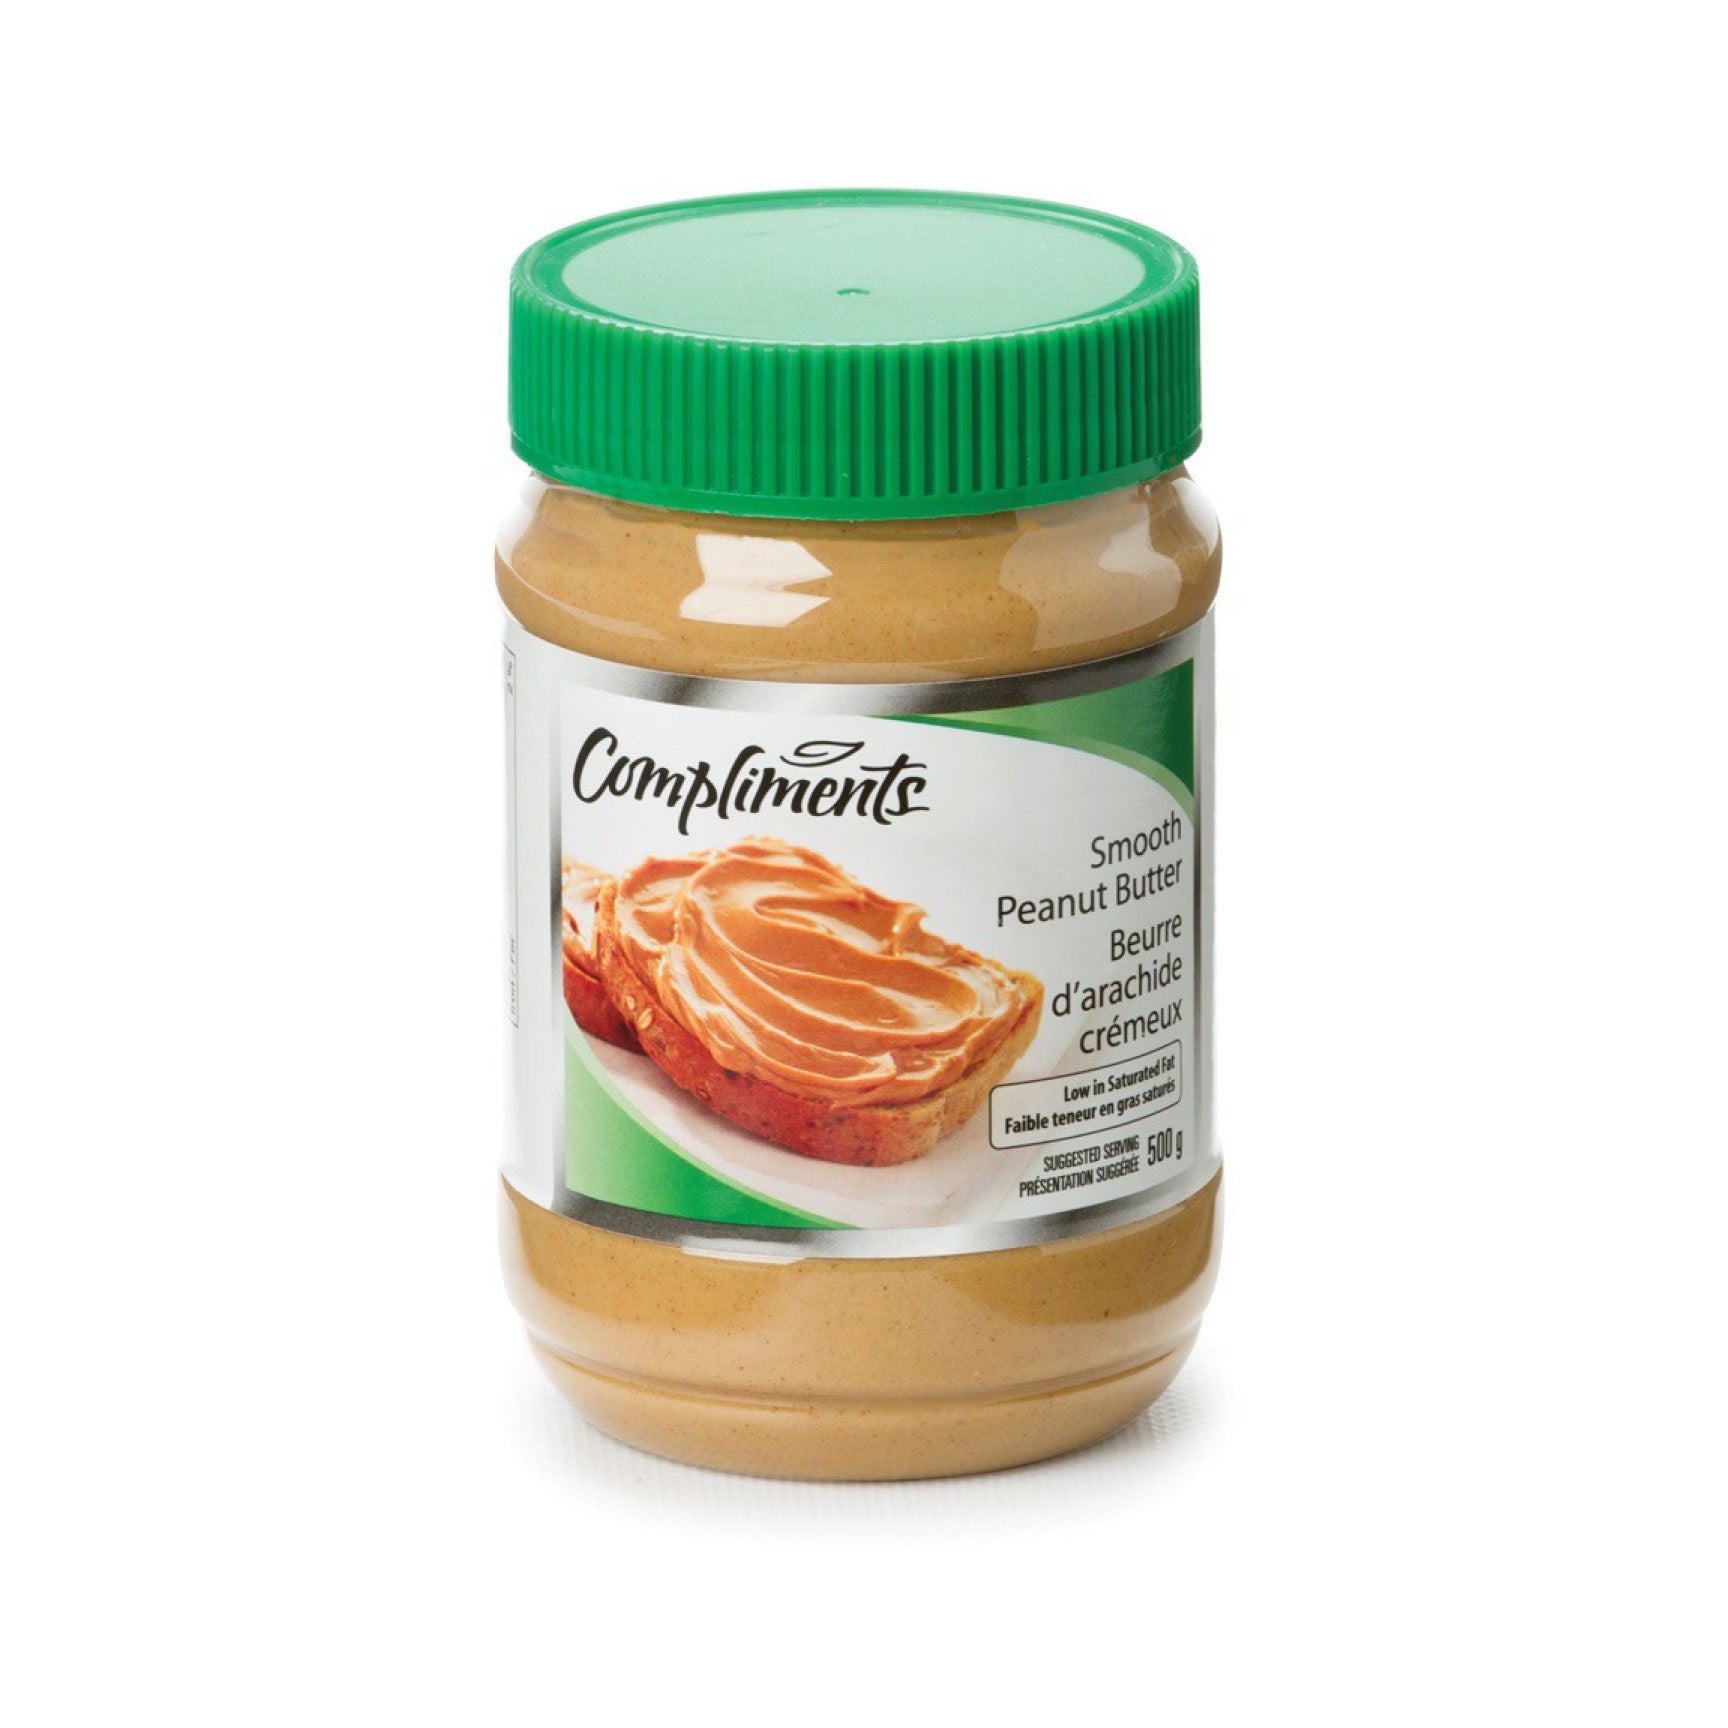 Compliments Peanut Butter, Smooth, 500g